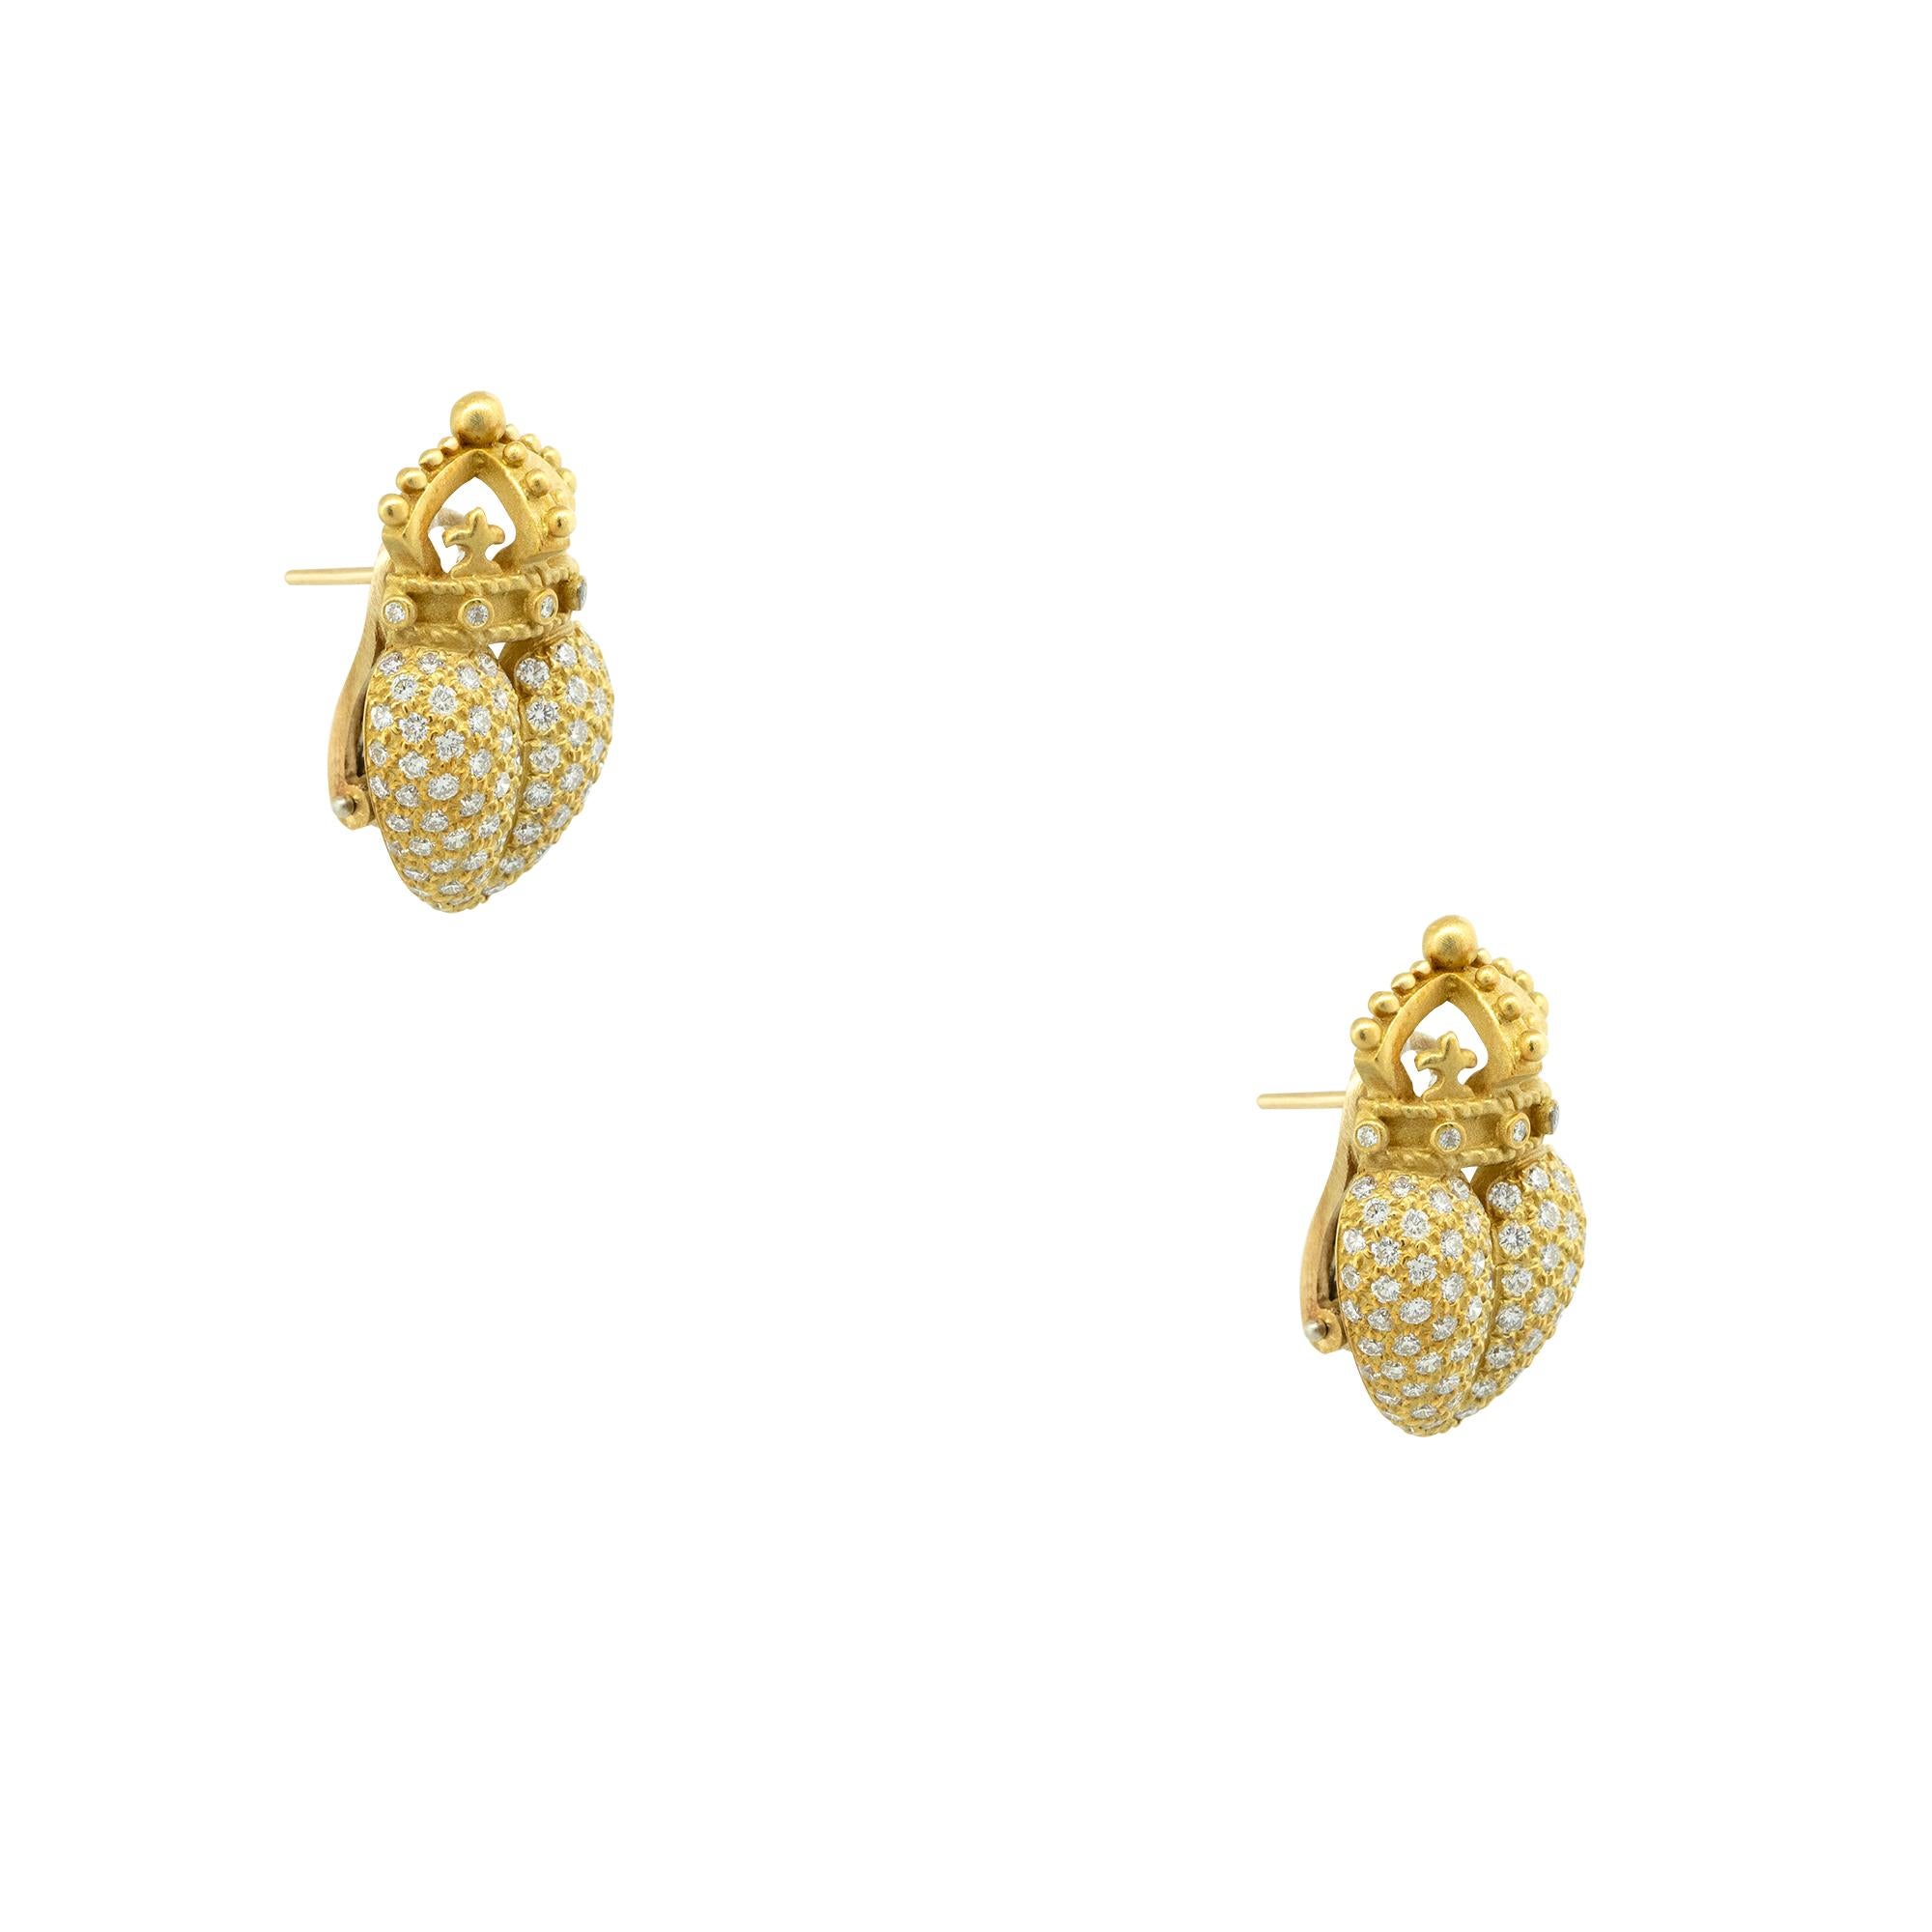 Barry Kieselstein 18k Yellow Gold 2ctw Pave Diamond Crown Heart Earrings
Designer: Barry Kieselstein
Material: 18k Yellow Gold
Diamond Details: There are approximately 2.00 carats of Pave set, round brilliant cut diamonds. All diamonds are